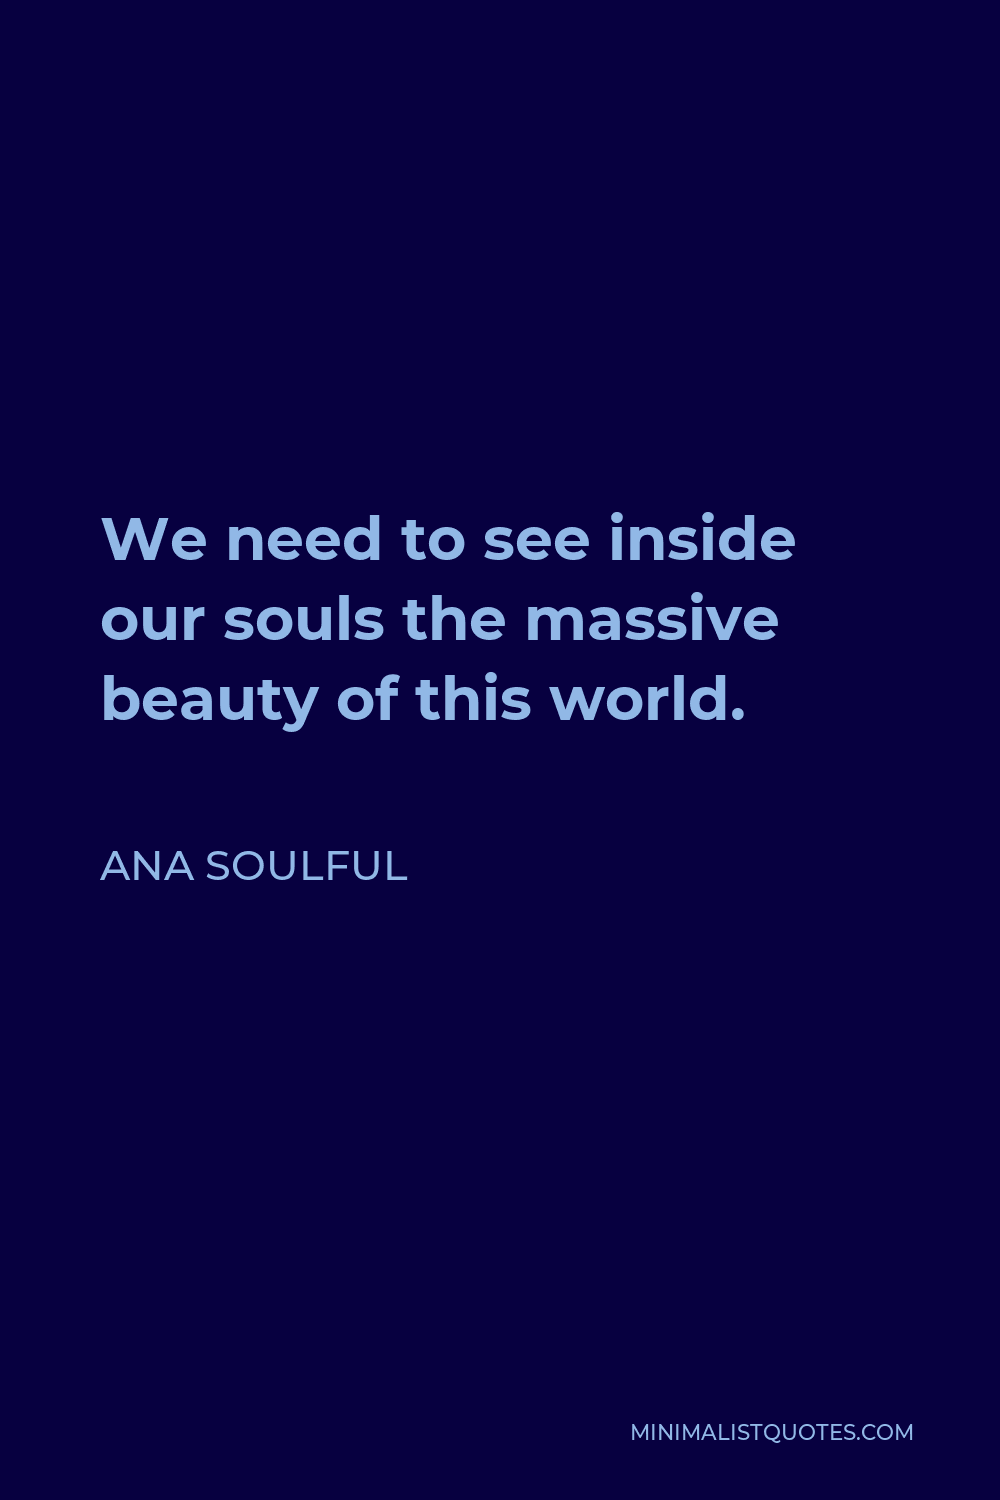 Ana Soulful Quote - We need to see inside our souls the massive beauty of this world.